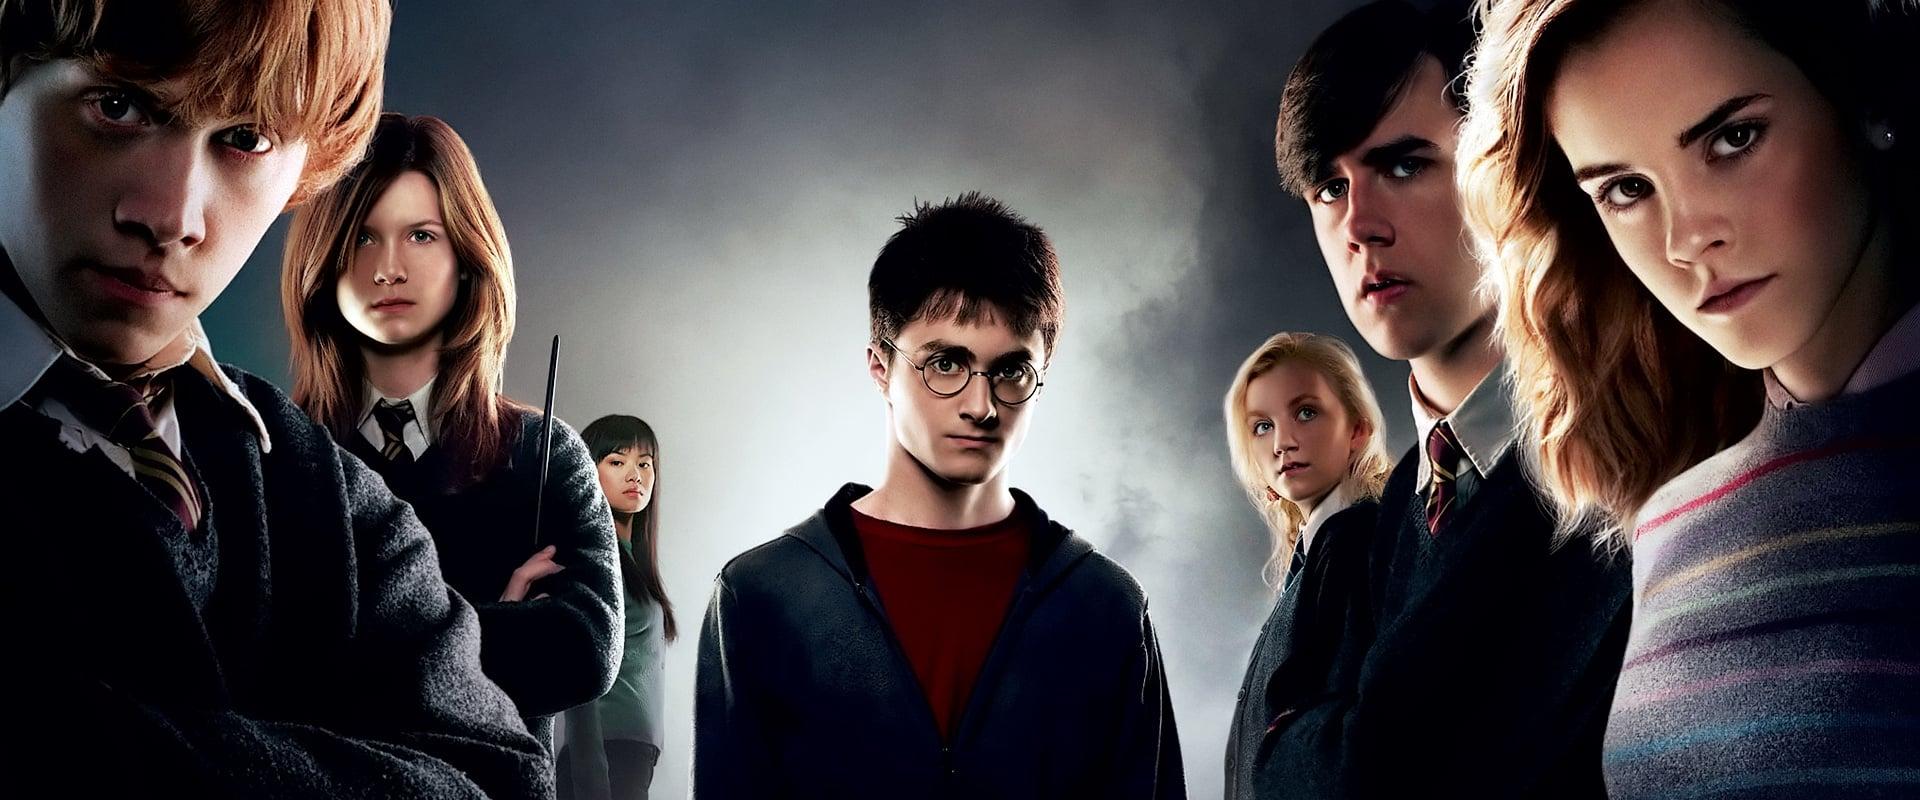 Harry Potter, surrounded by other characters from the movies